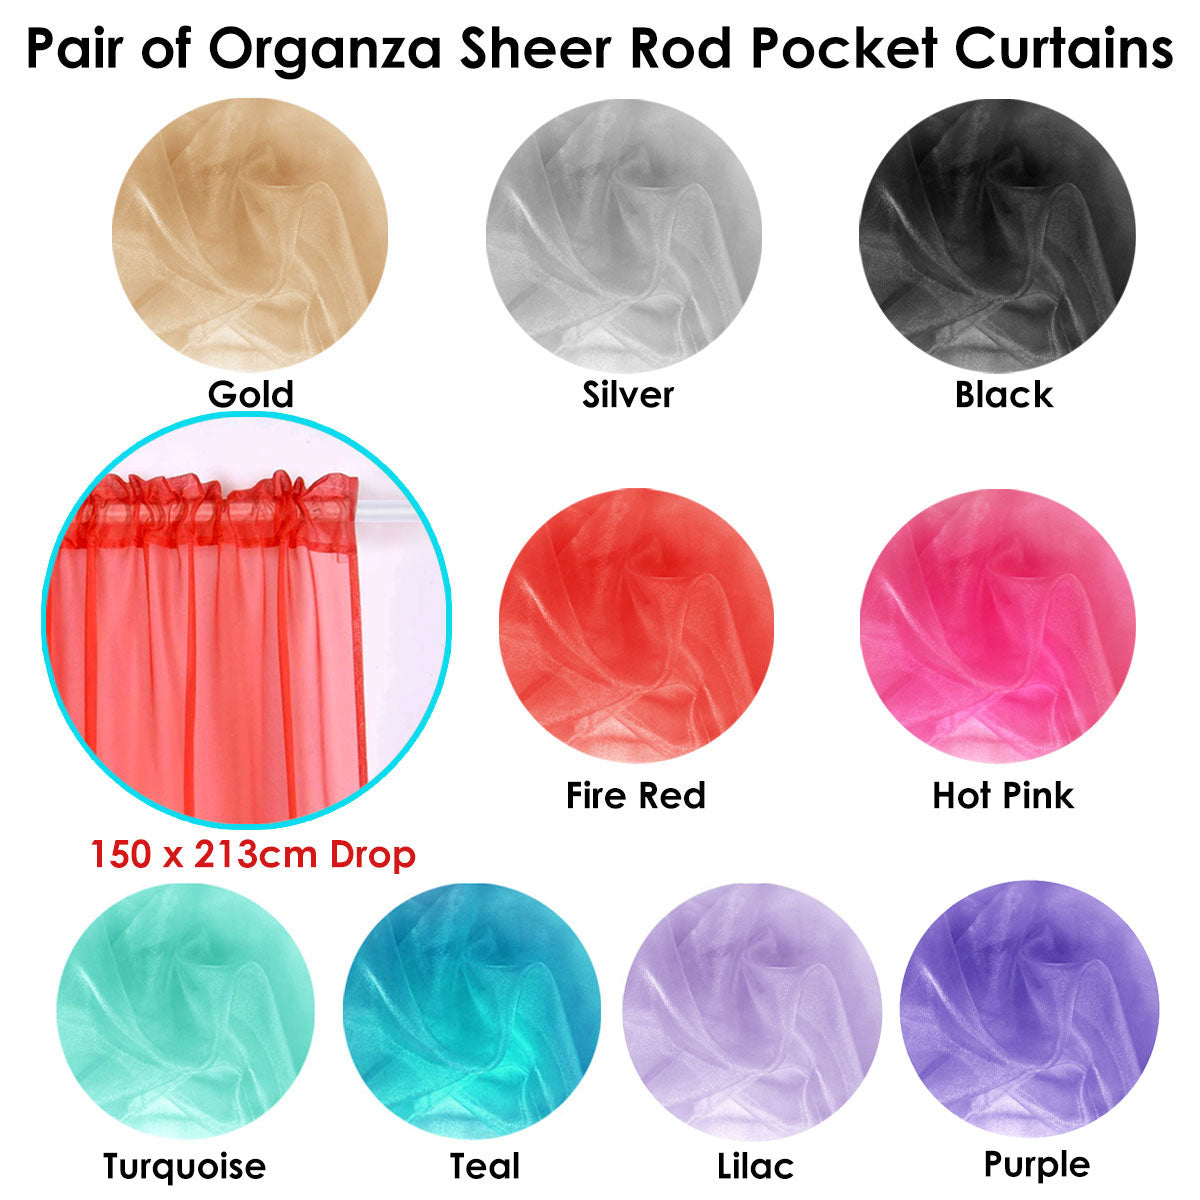 Pair of Organza Sheer Rod Pocket Curtains Fire Red